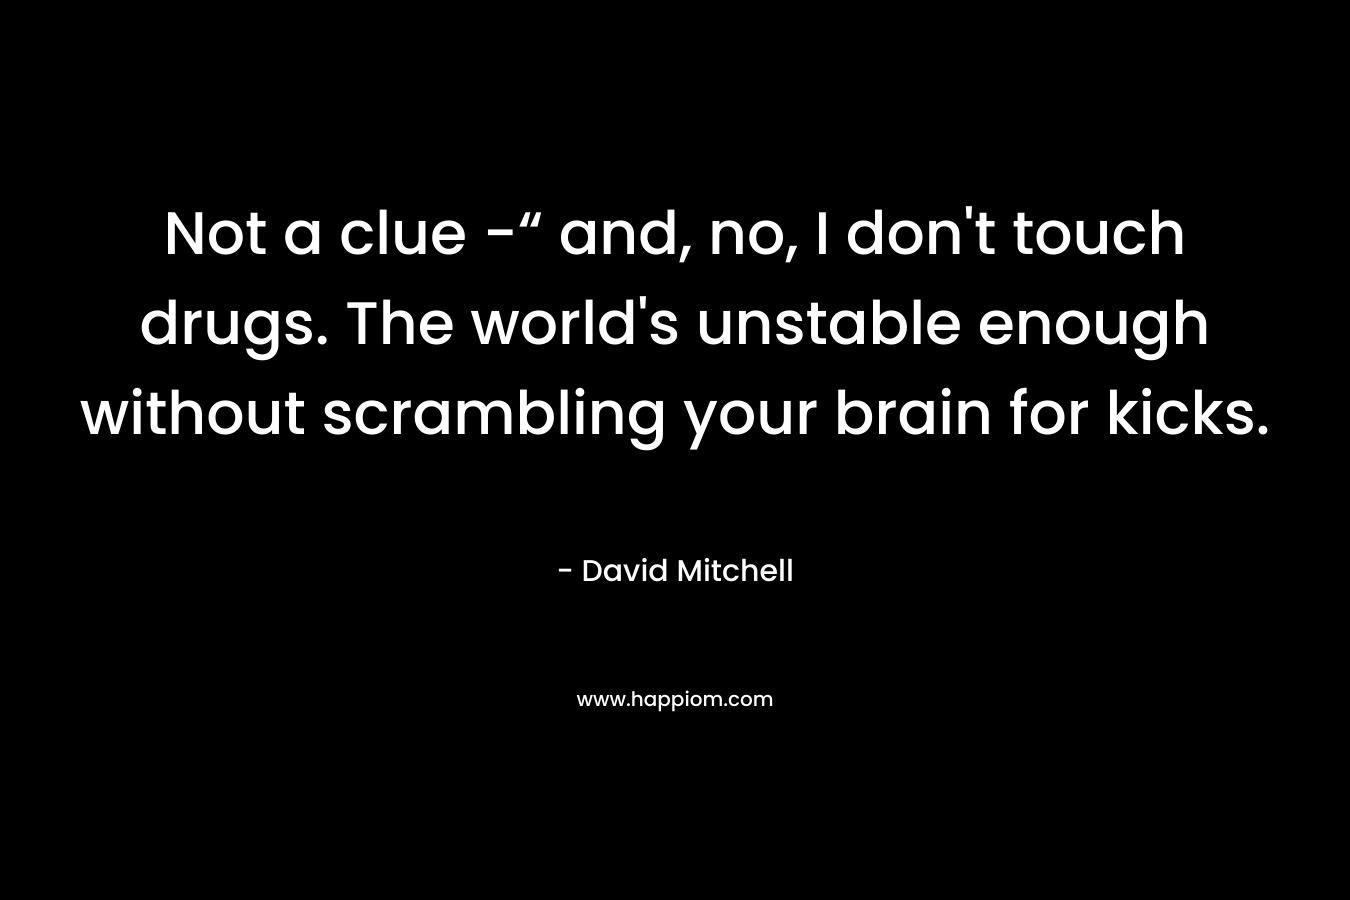 Not a clue -“ and, no, I don't touch drugs. The world's unstable enough without scrambling your brain for kicks.